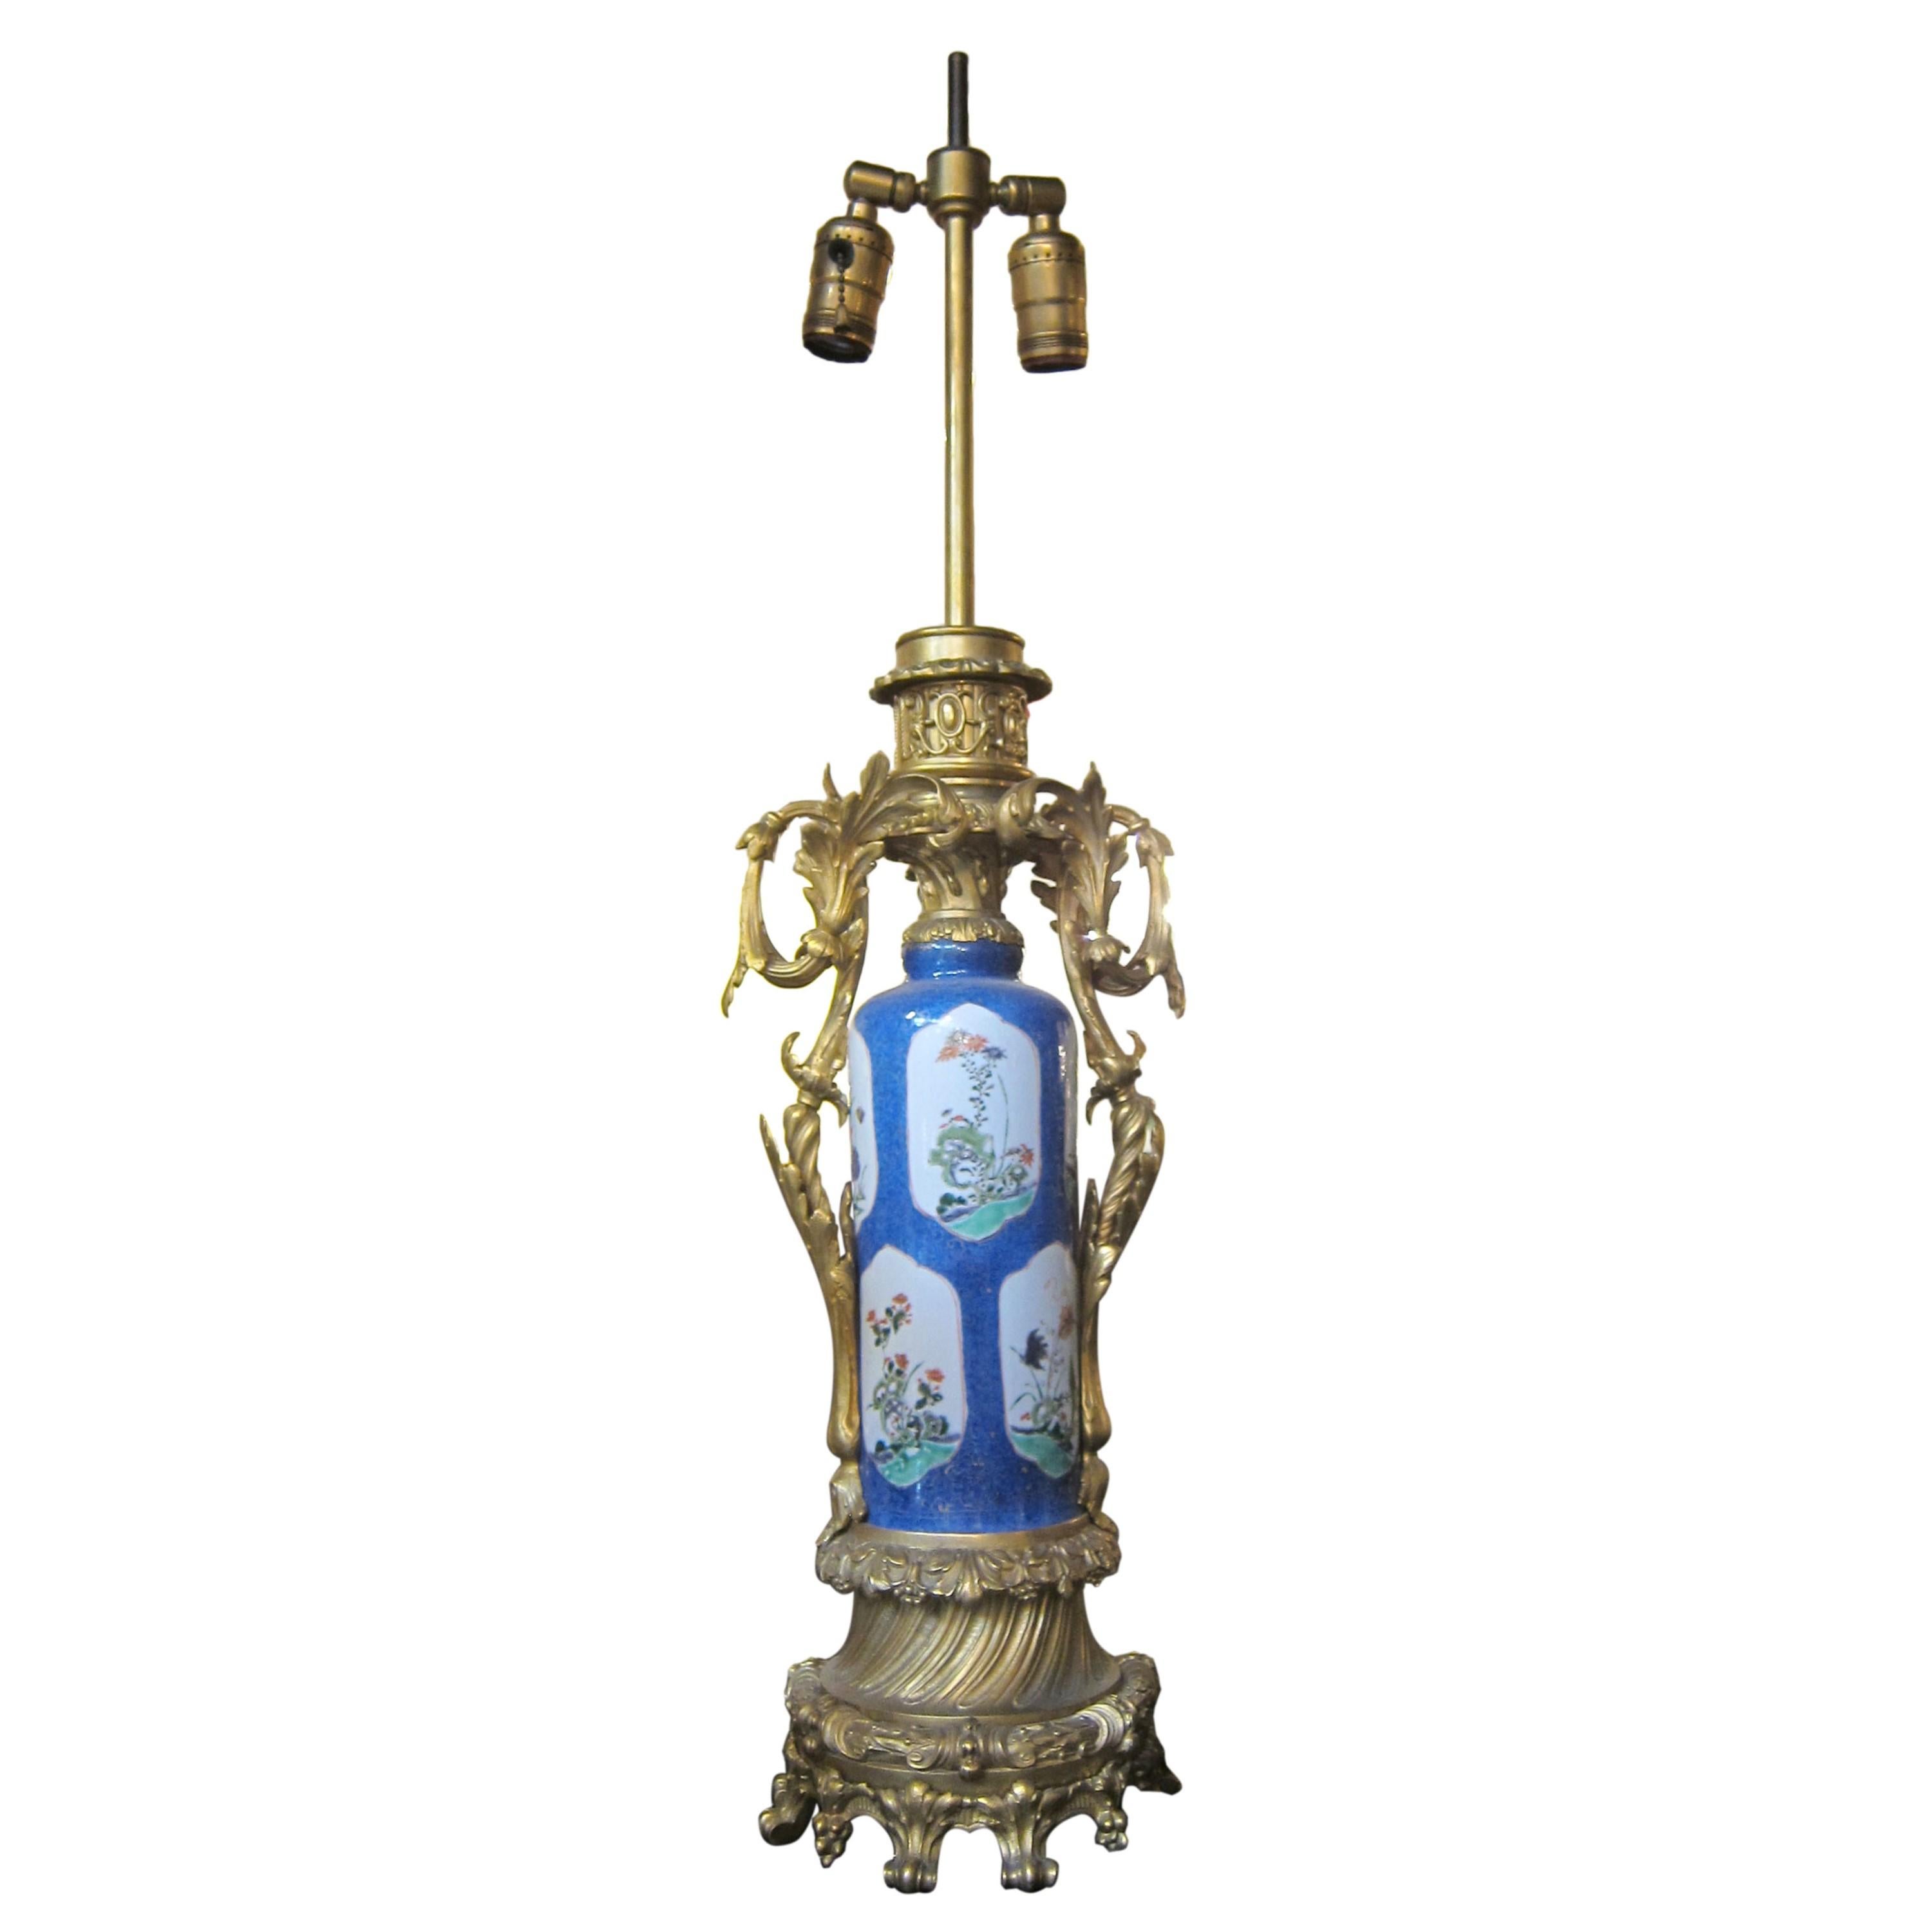 Pair French blue porcelain urn table lamps with finely detailed bronze ormolu mounts. Each light takes two bulbs. Priced as a pair. Cleaned and restored. Please note, this item is located in one of our NYC locations.